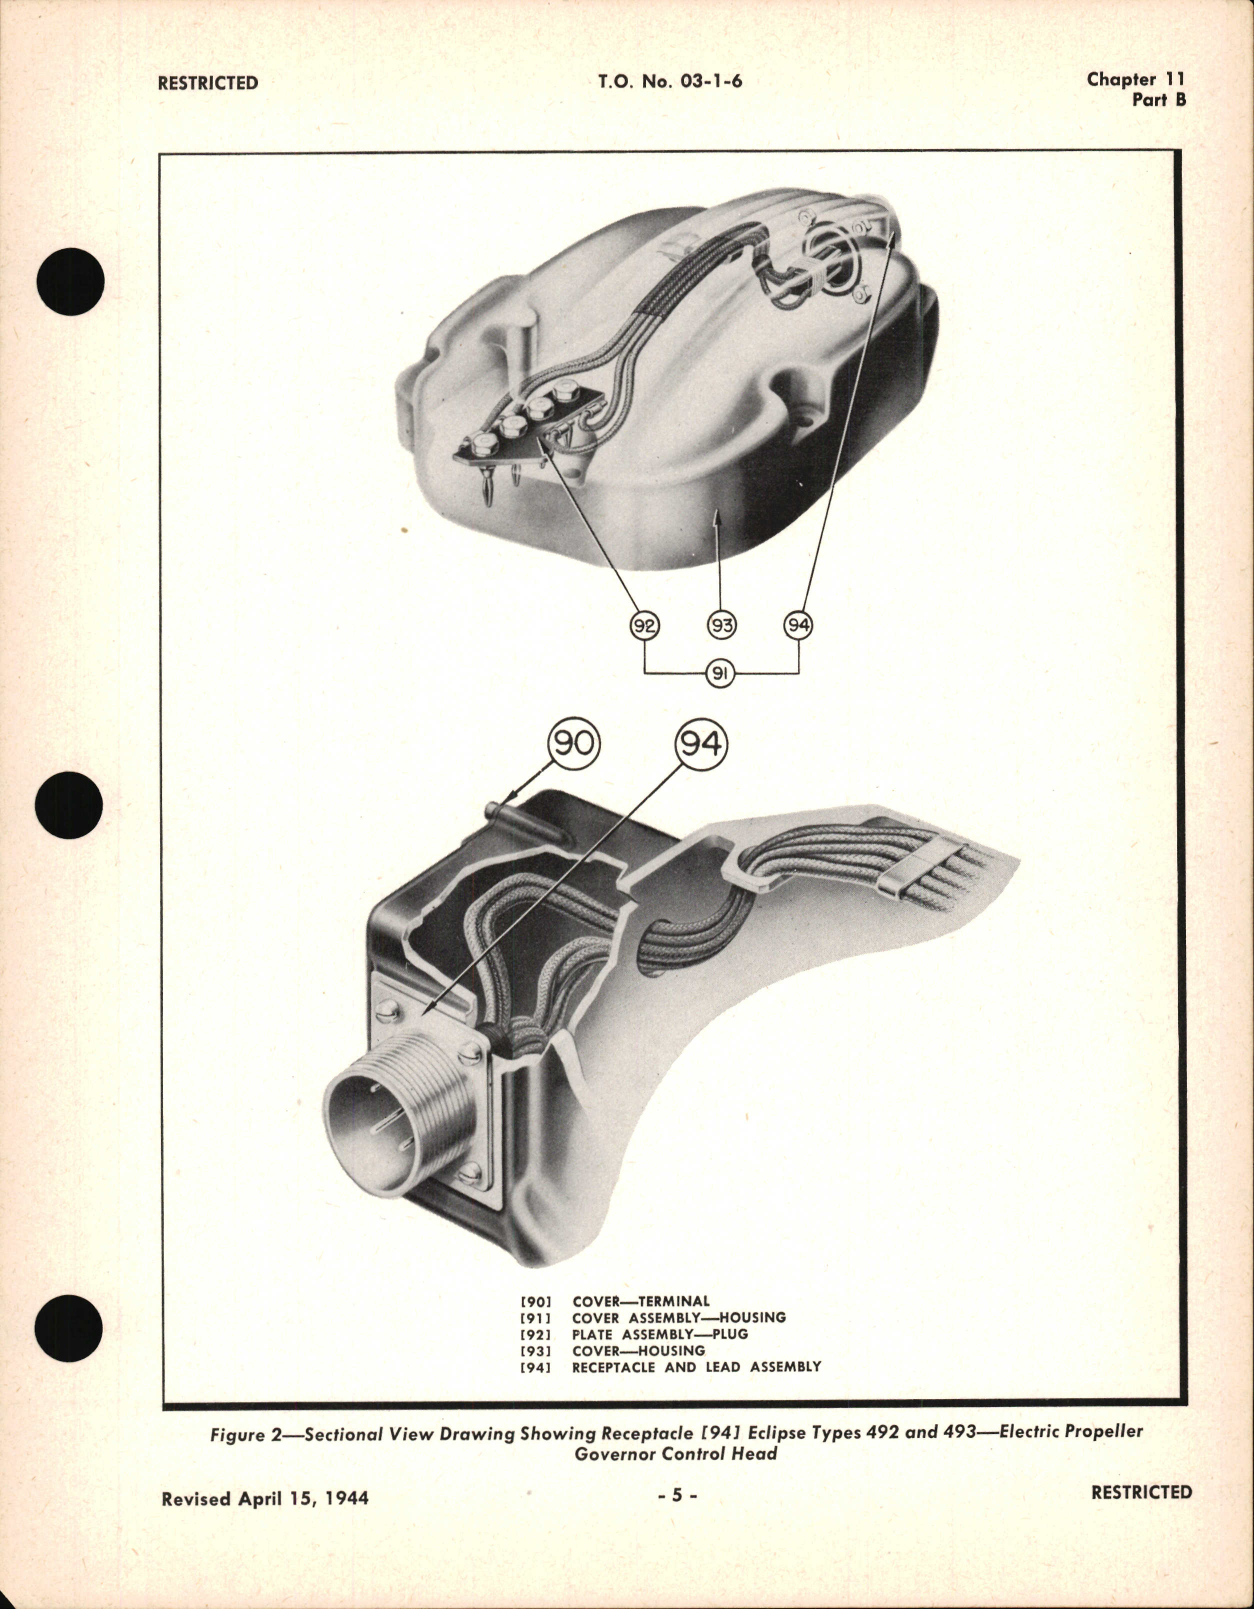 Sample page 5 from AirCorps Library document: Overhaul Instructions for Electric Propeller Governor Control Head